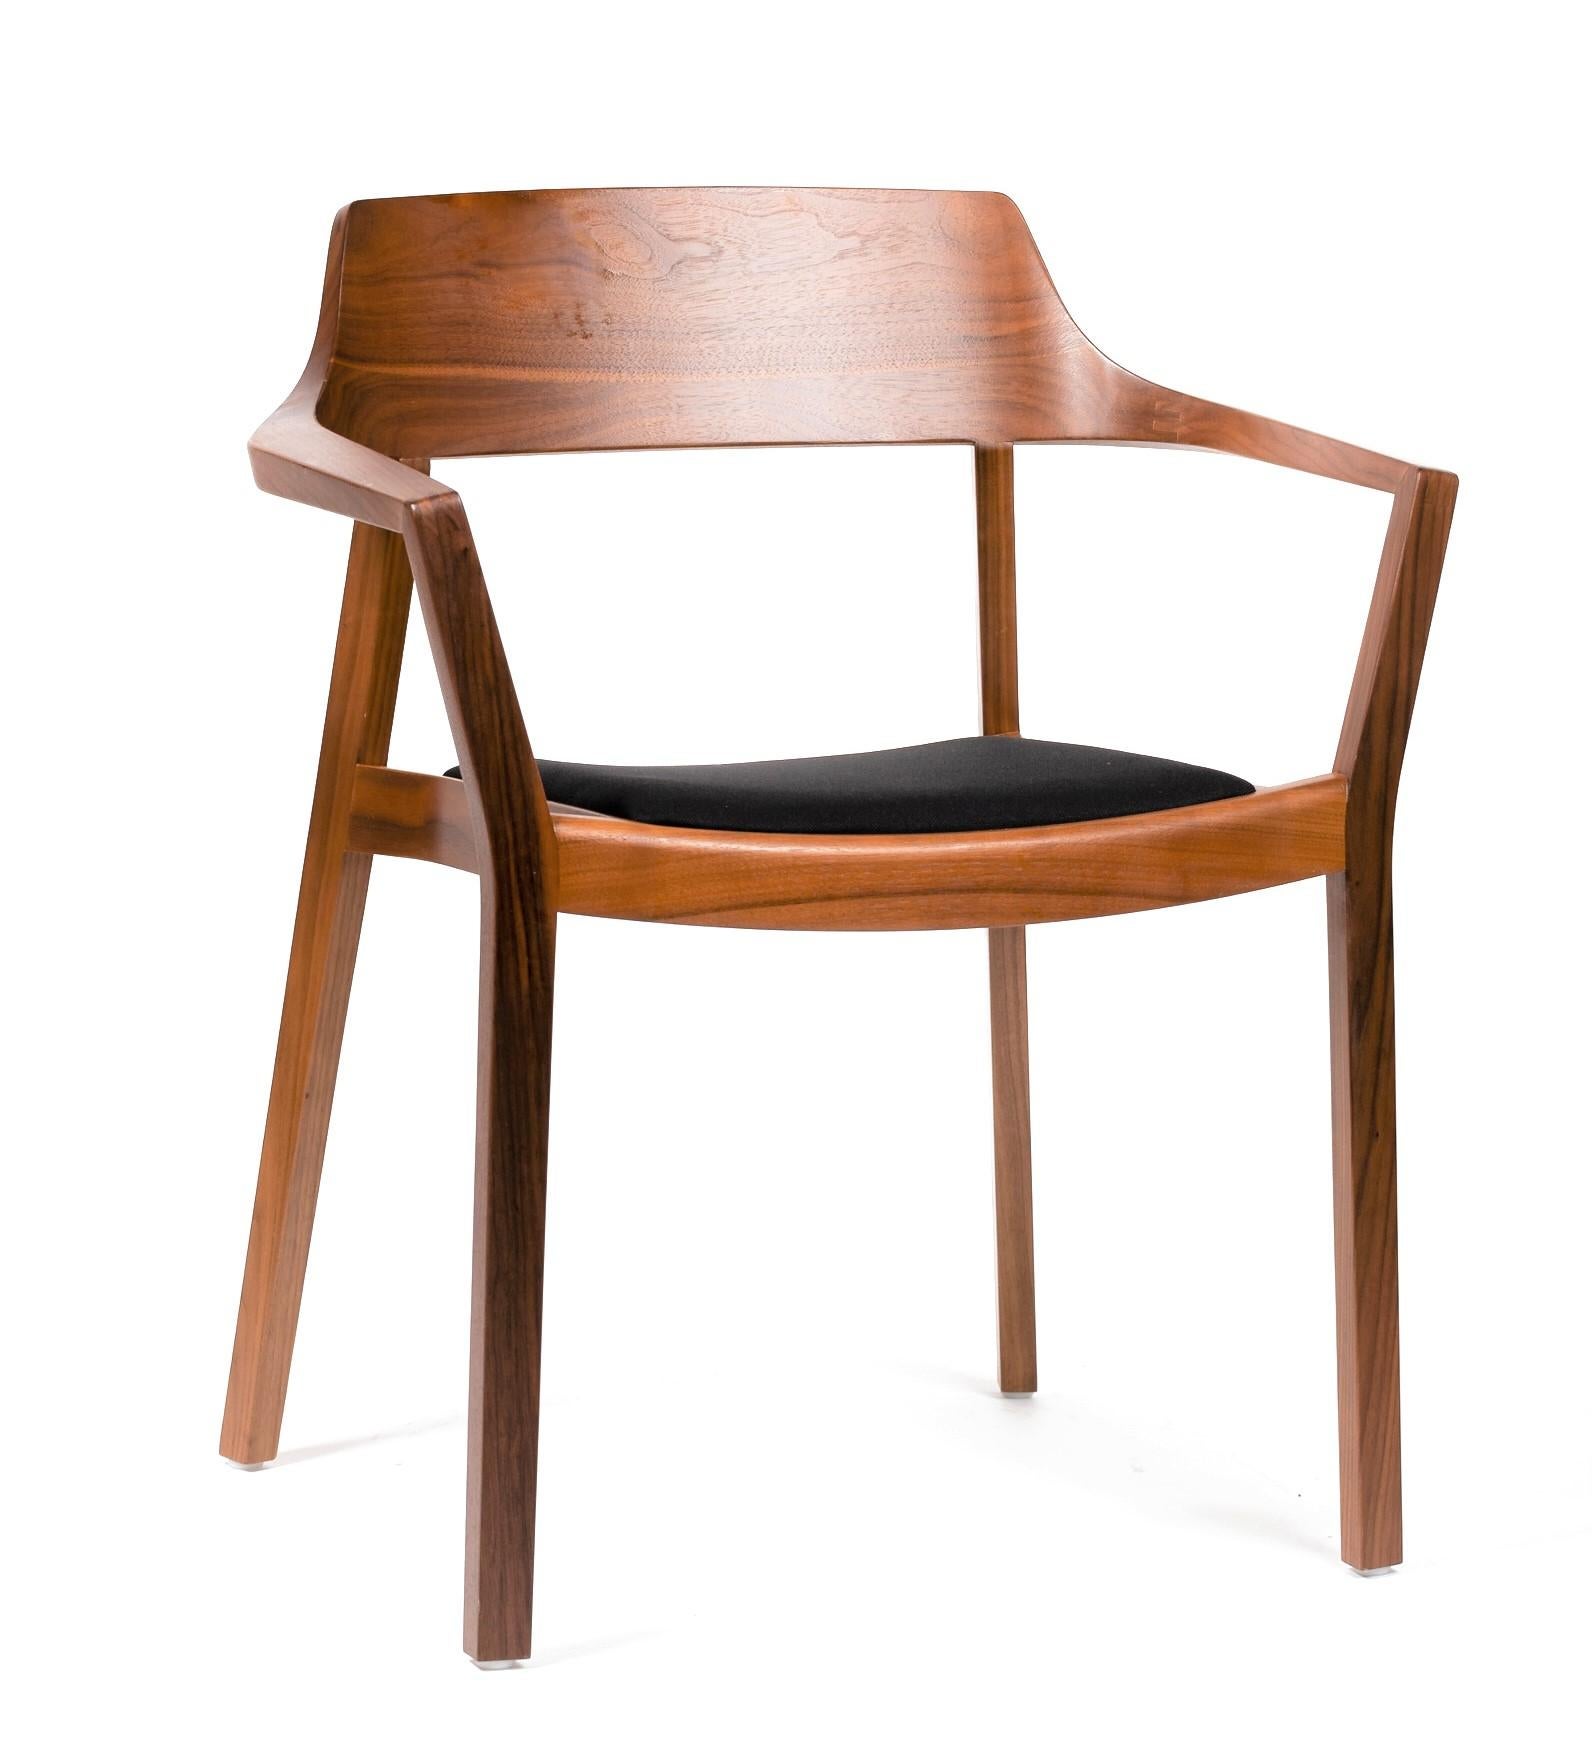 Ono is a classic piece of Swiss design and the lightest of all wood chairs, weighing only 12.5 lbs (5.7 kg).

Designed by This Weber.

Manufactured with care from American Walnut wood, the frame is in solid wood and the seat is in molded